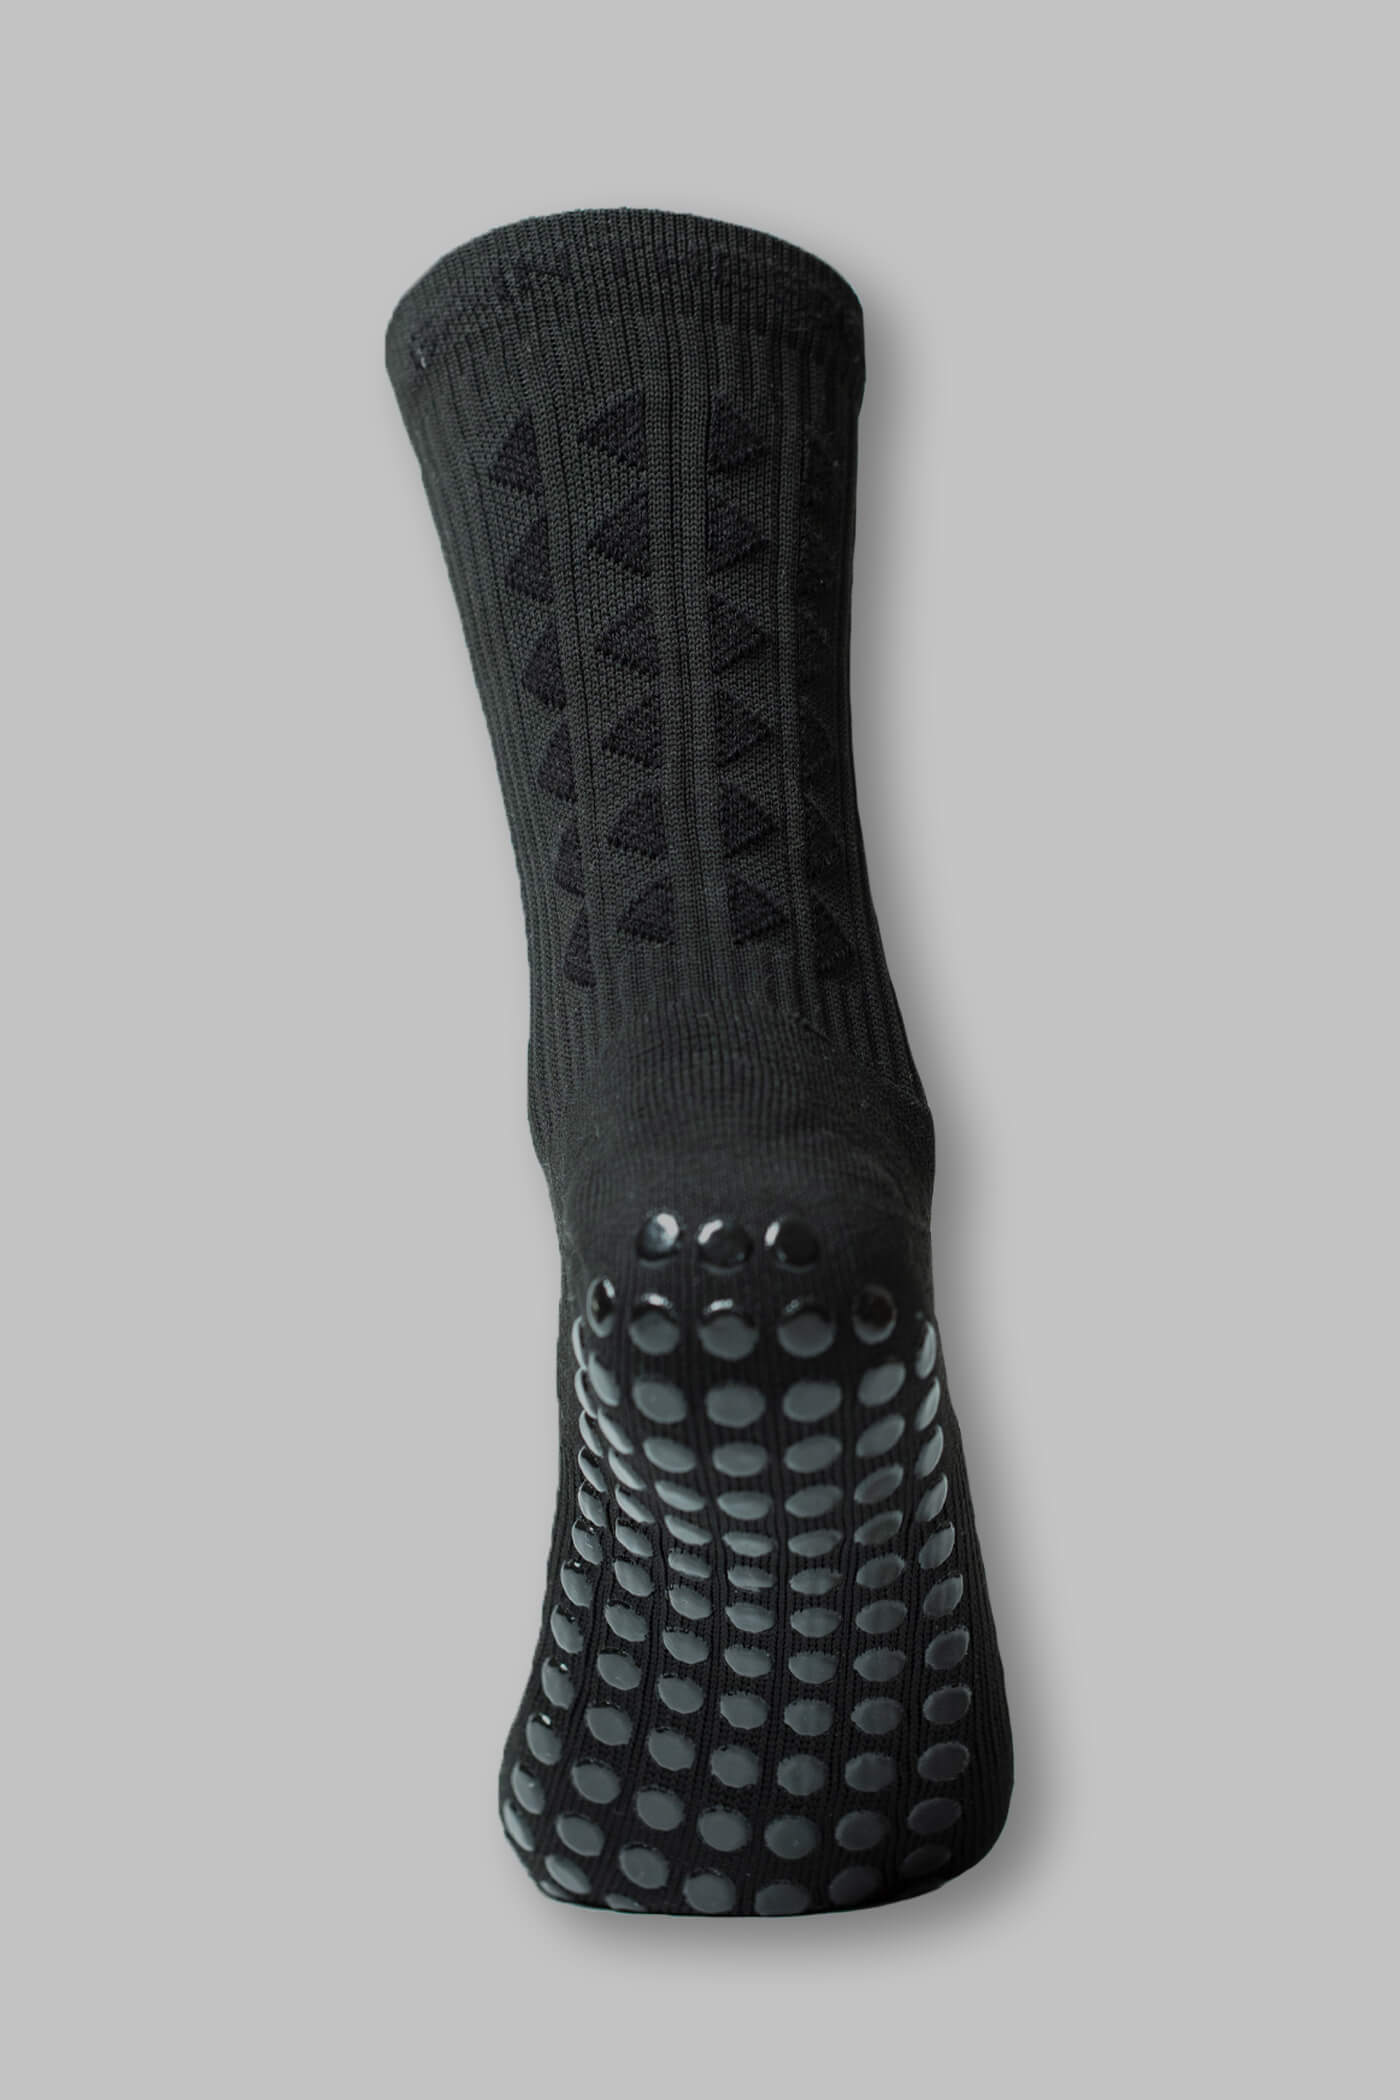 BLACKOUT LIMITED EDITION GRIP SOCKS 2.0 - Gain The Edge Official